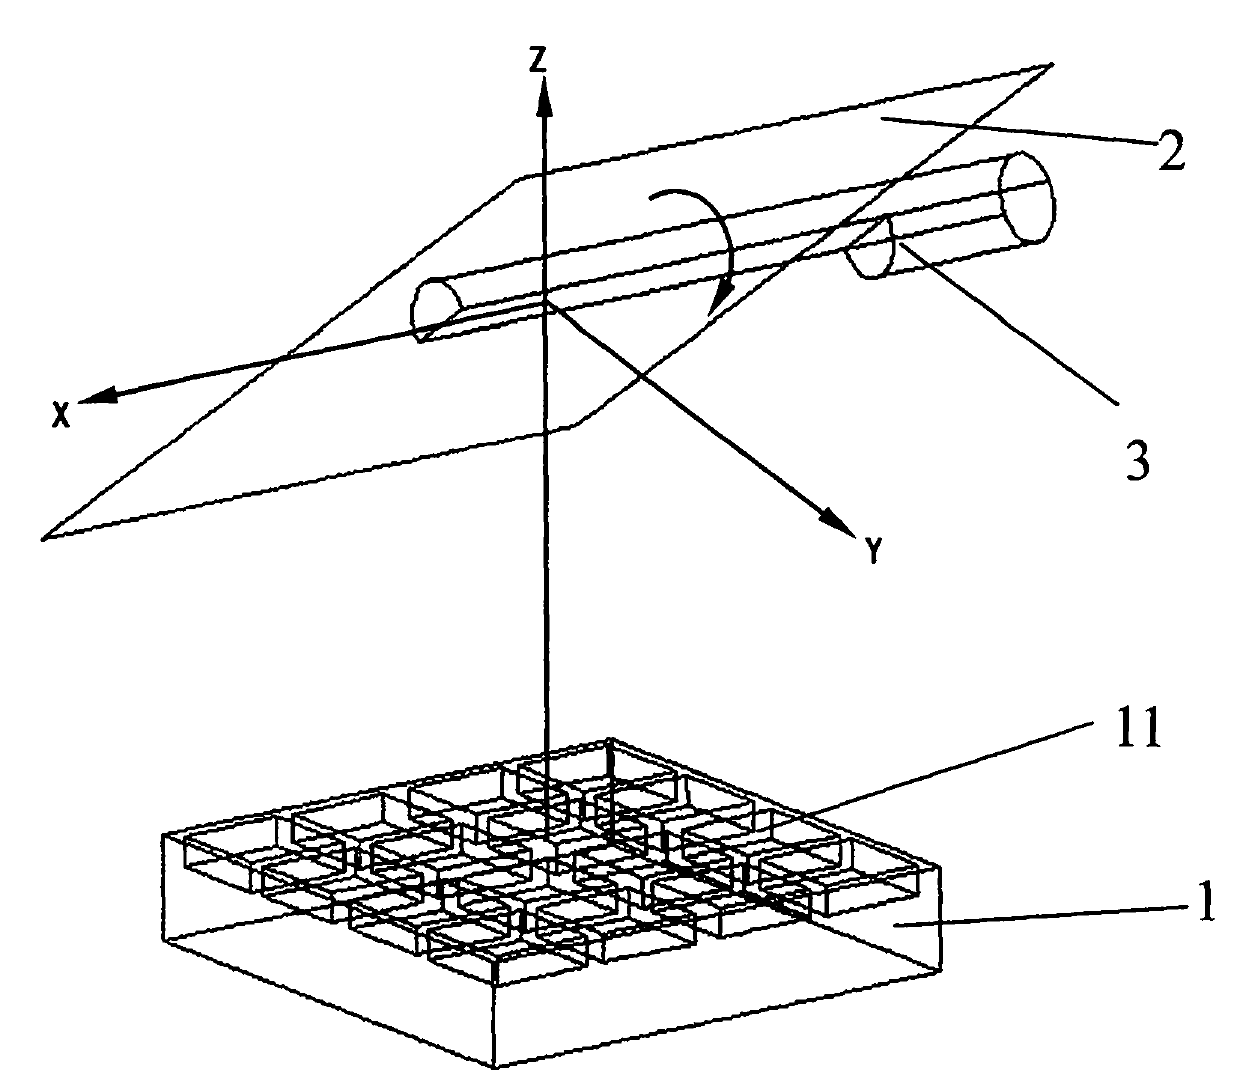 Method for manufacturing mirror scanning array antenna